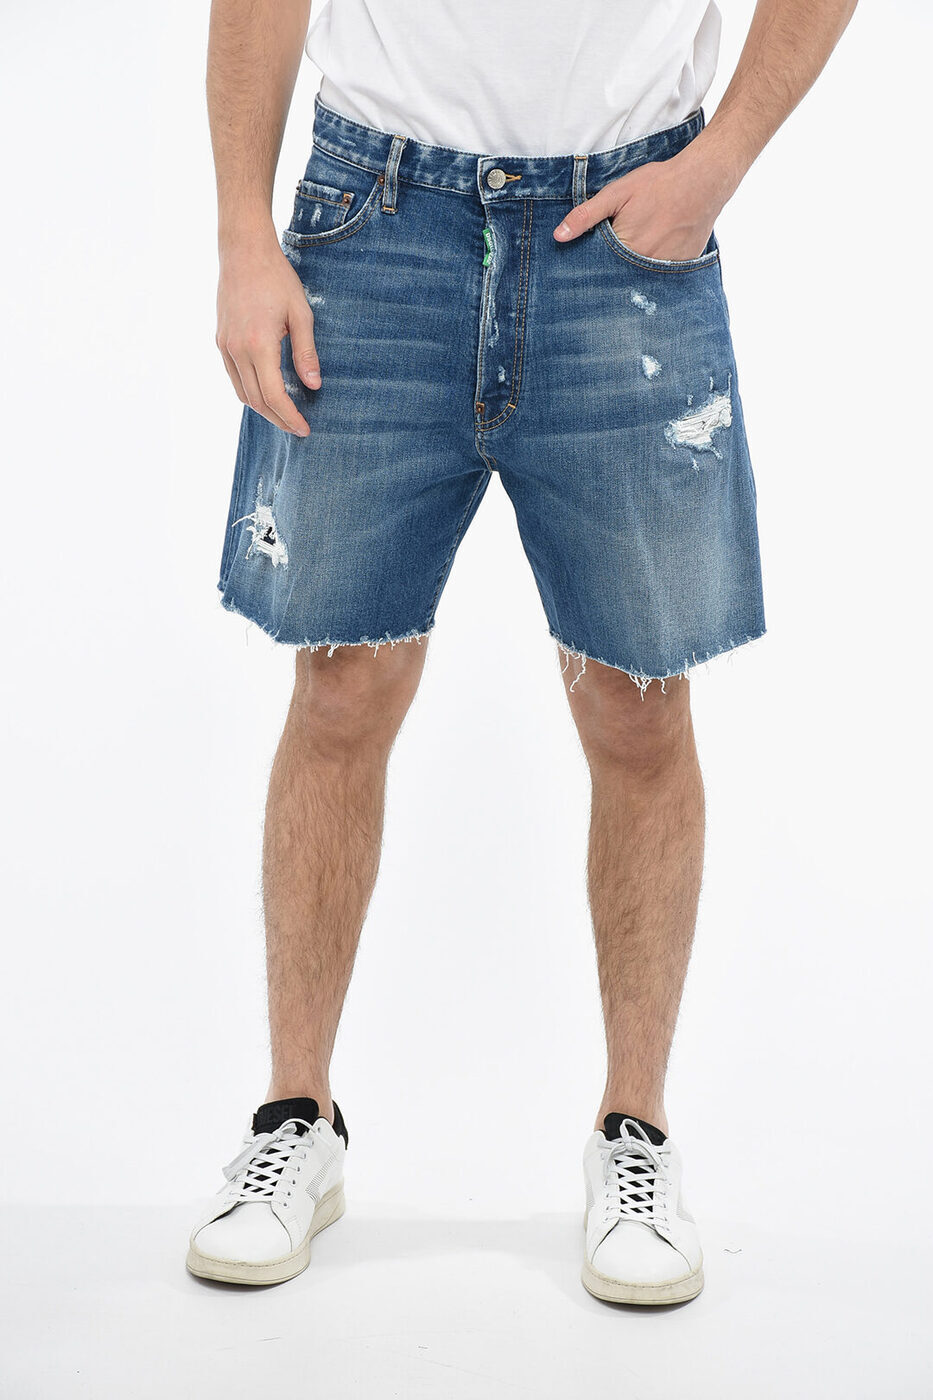 DSQUARED2 ディースクエアード デニム S78MU0038 S30817 470 メンズ ONE LIFE ONE PLANET DISTRASSED DENIM BOXER FIT SHORTS 【関税・送料無料】【ラッピング無料】 dk